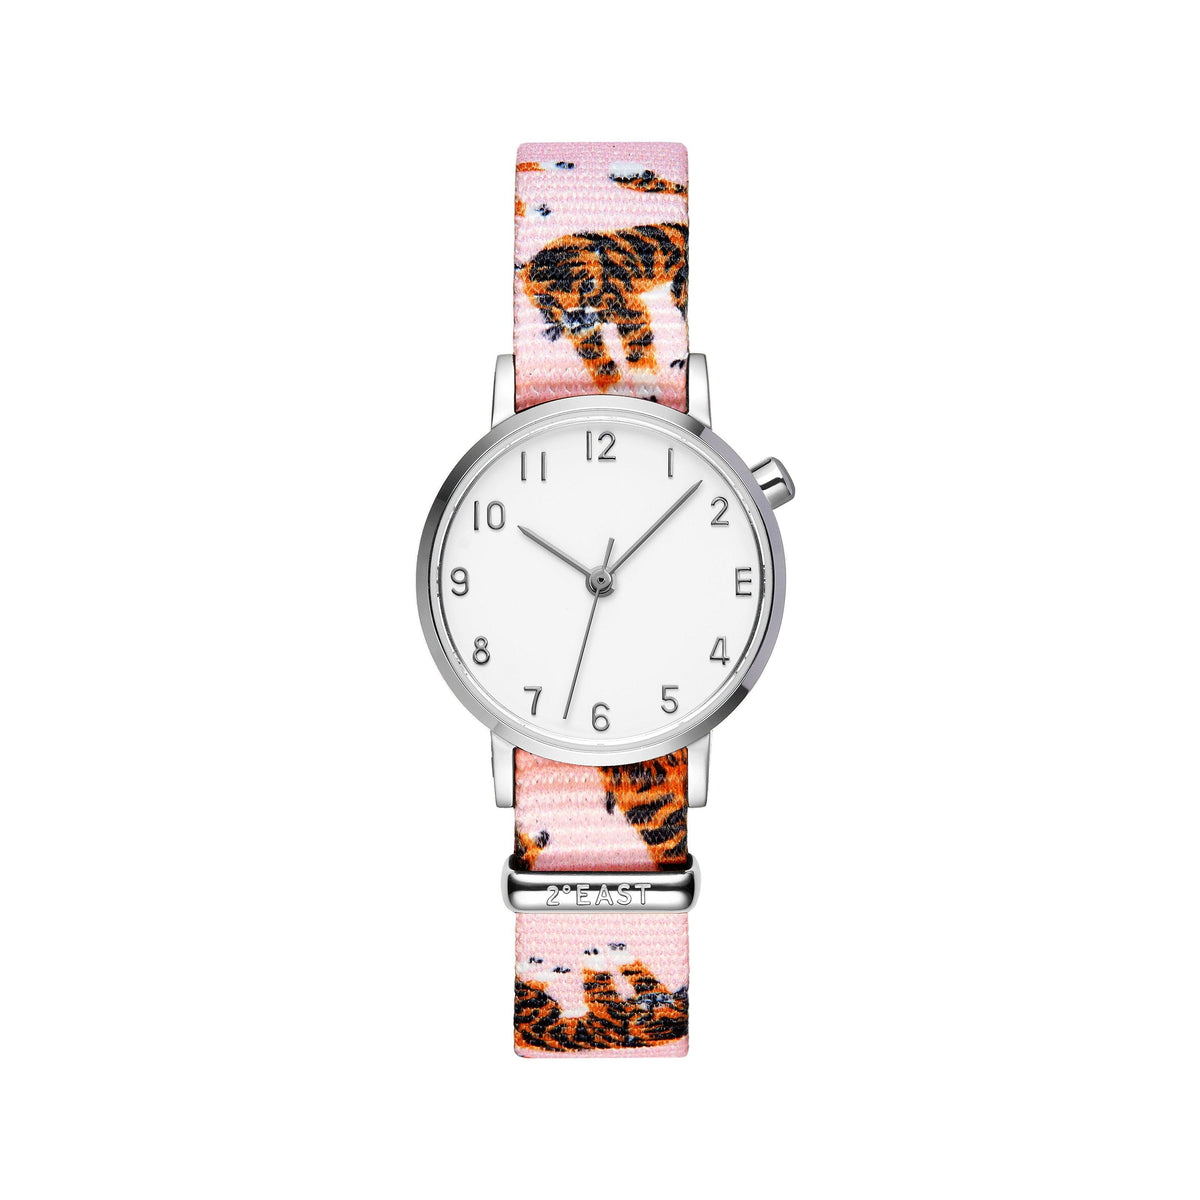 The White and Silver Watch - Tigers (Kids)